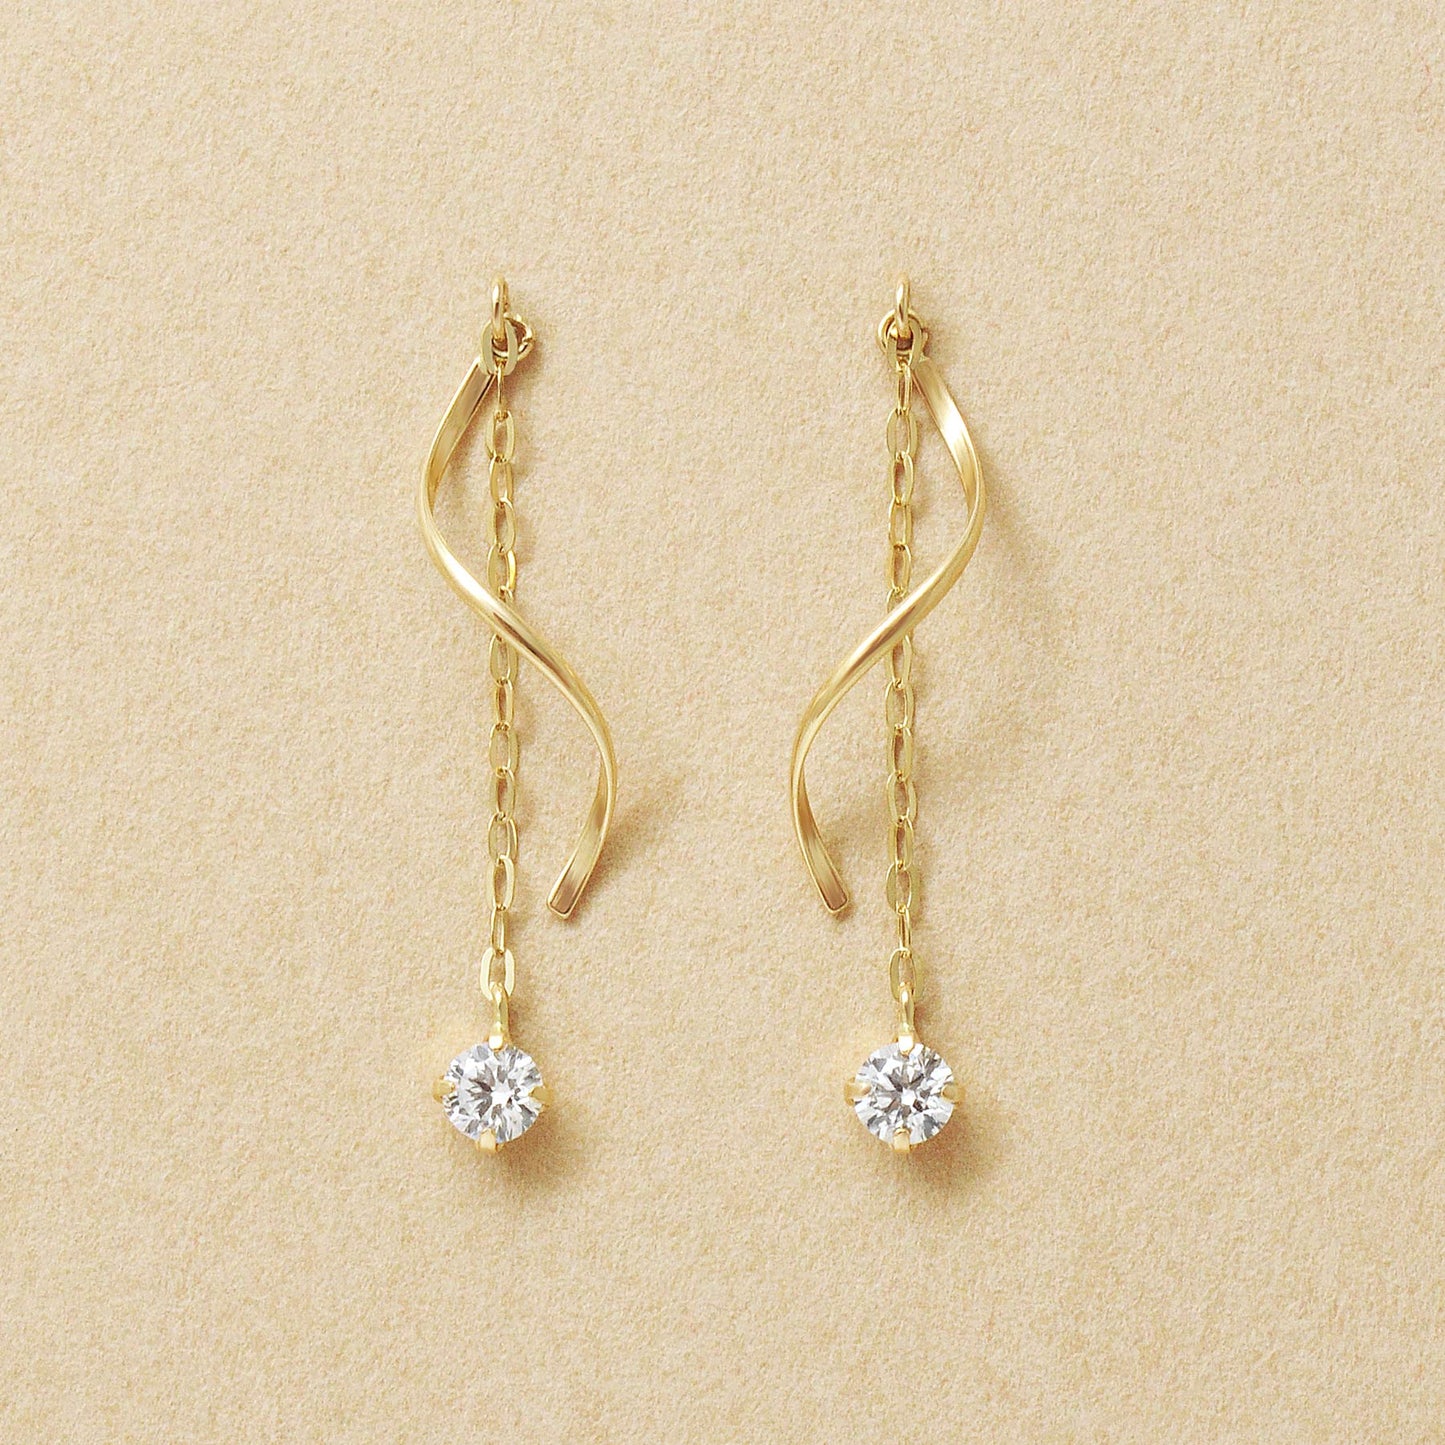 10K Glittering Twisted Dangle Earrings (Yellow Gold) - Product Image